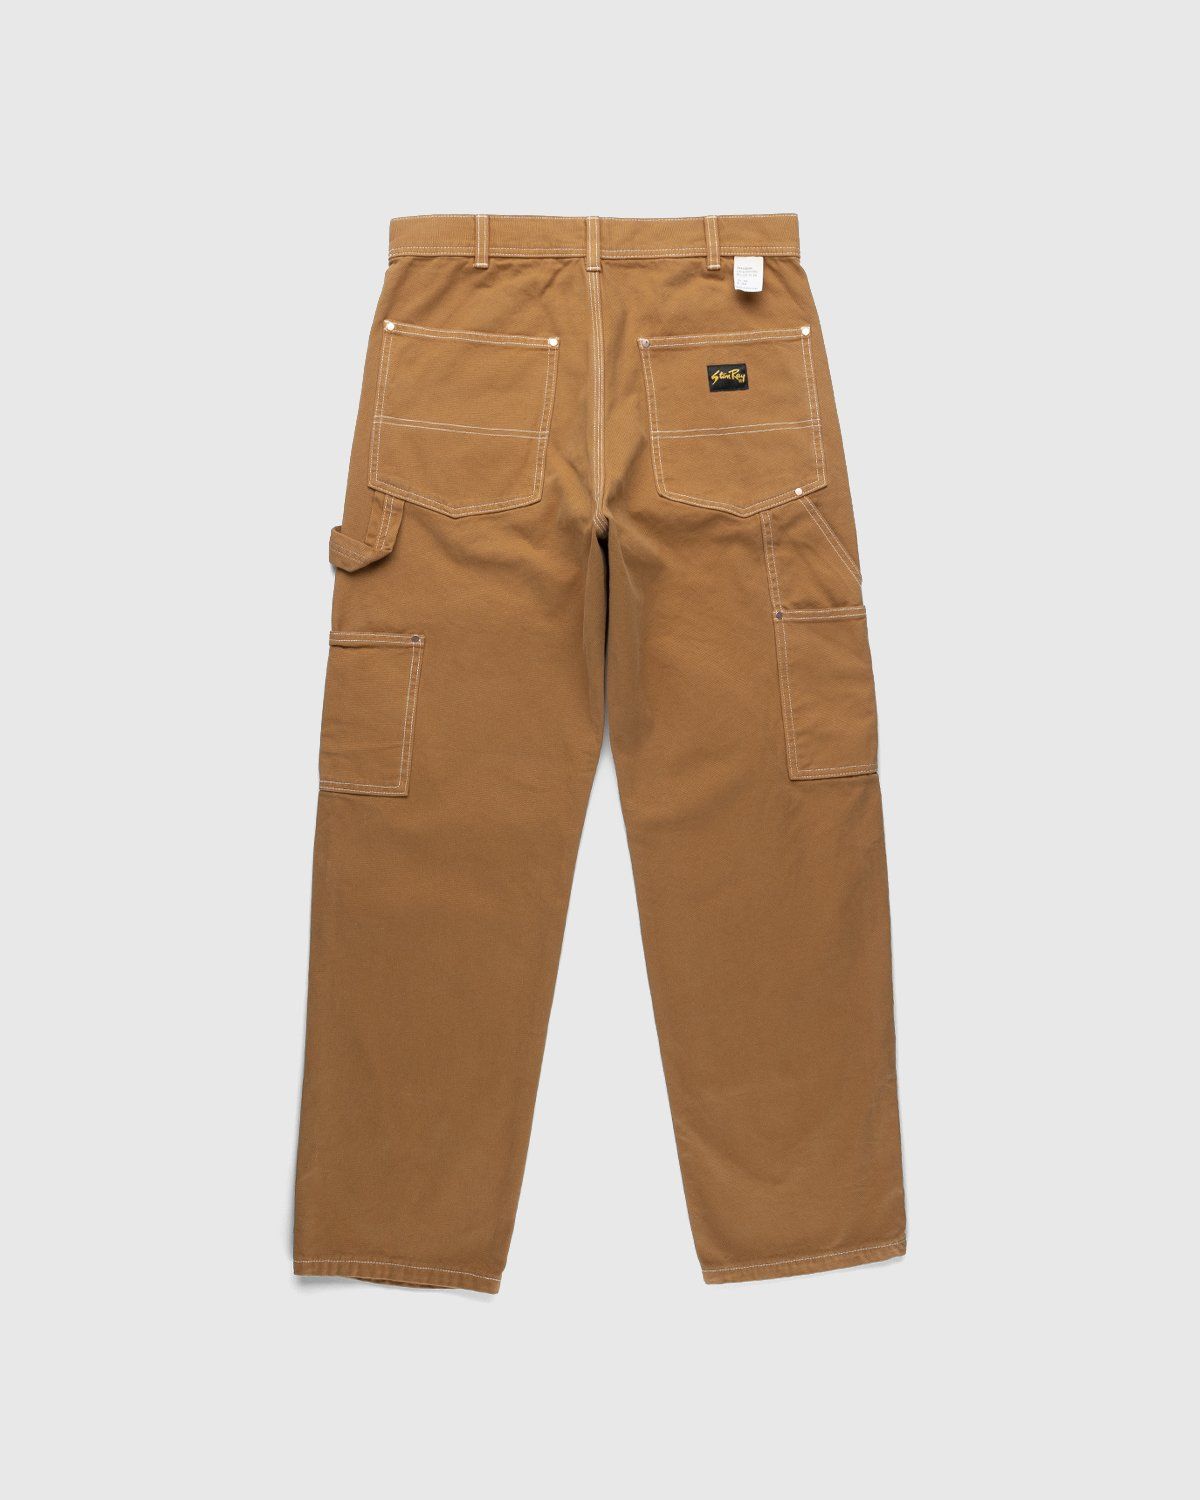 Stan Ray – Double Knee Pant Brown Duck - Image 2